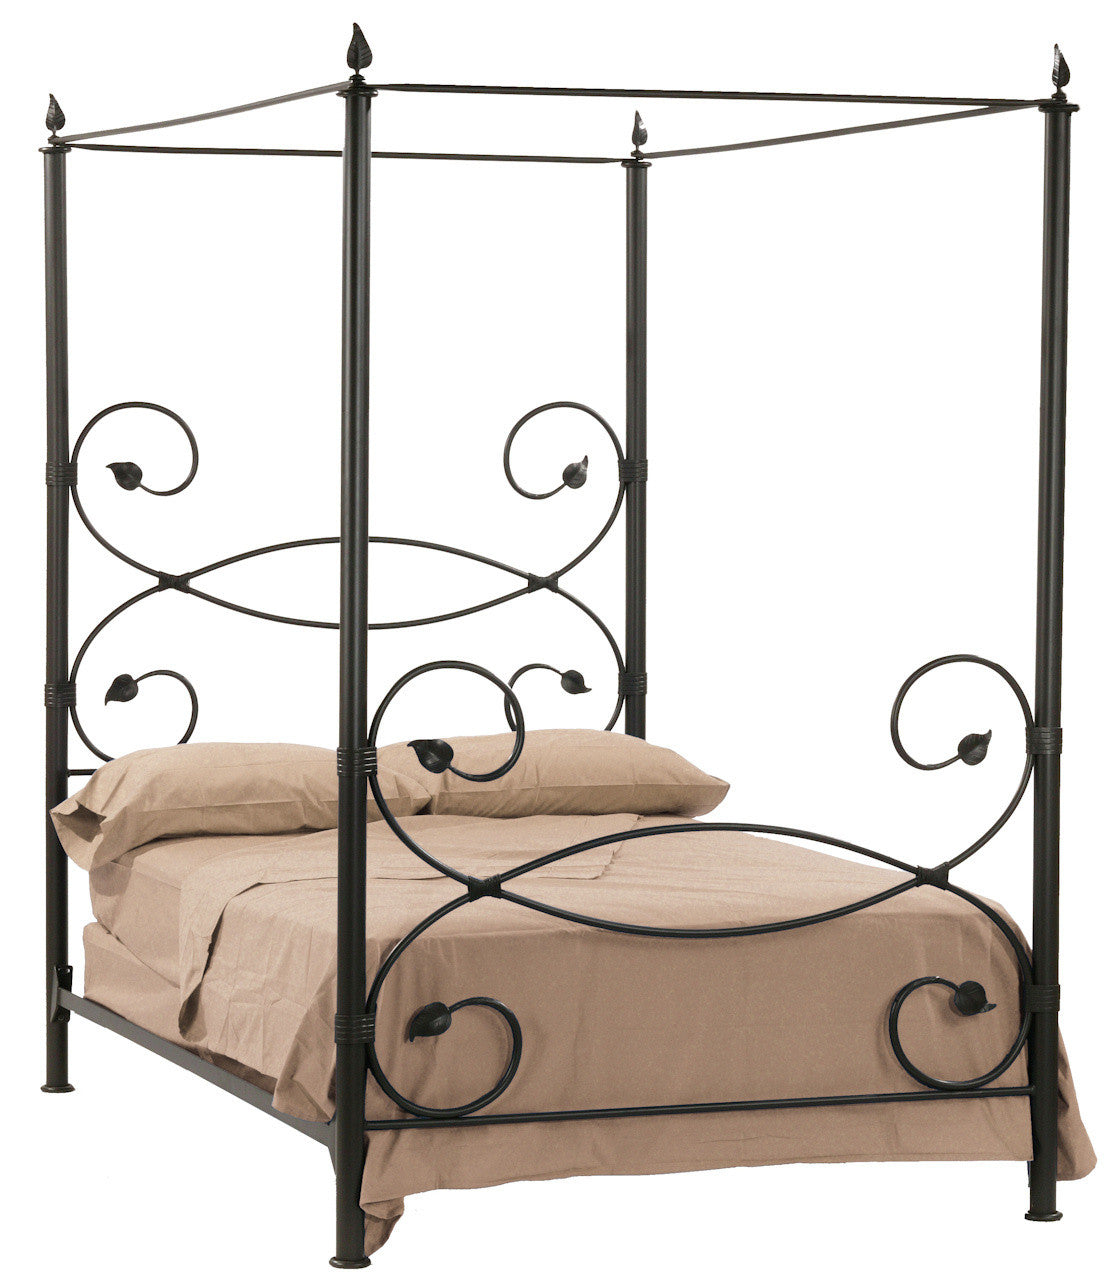 Stone County Ironworks 900-733 Leaf Canopy Queen Bed